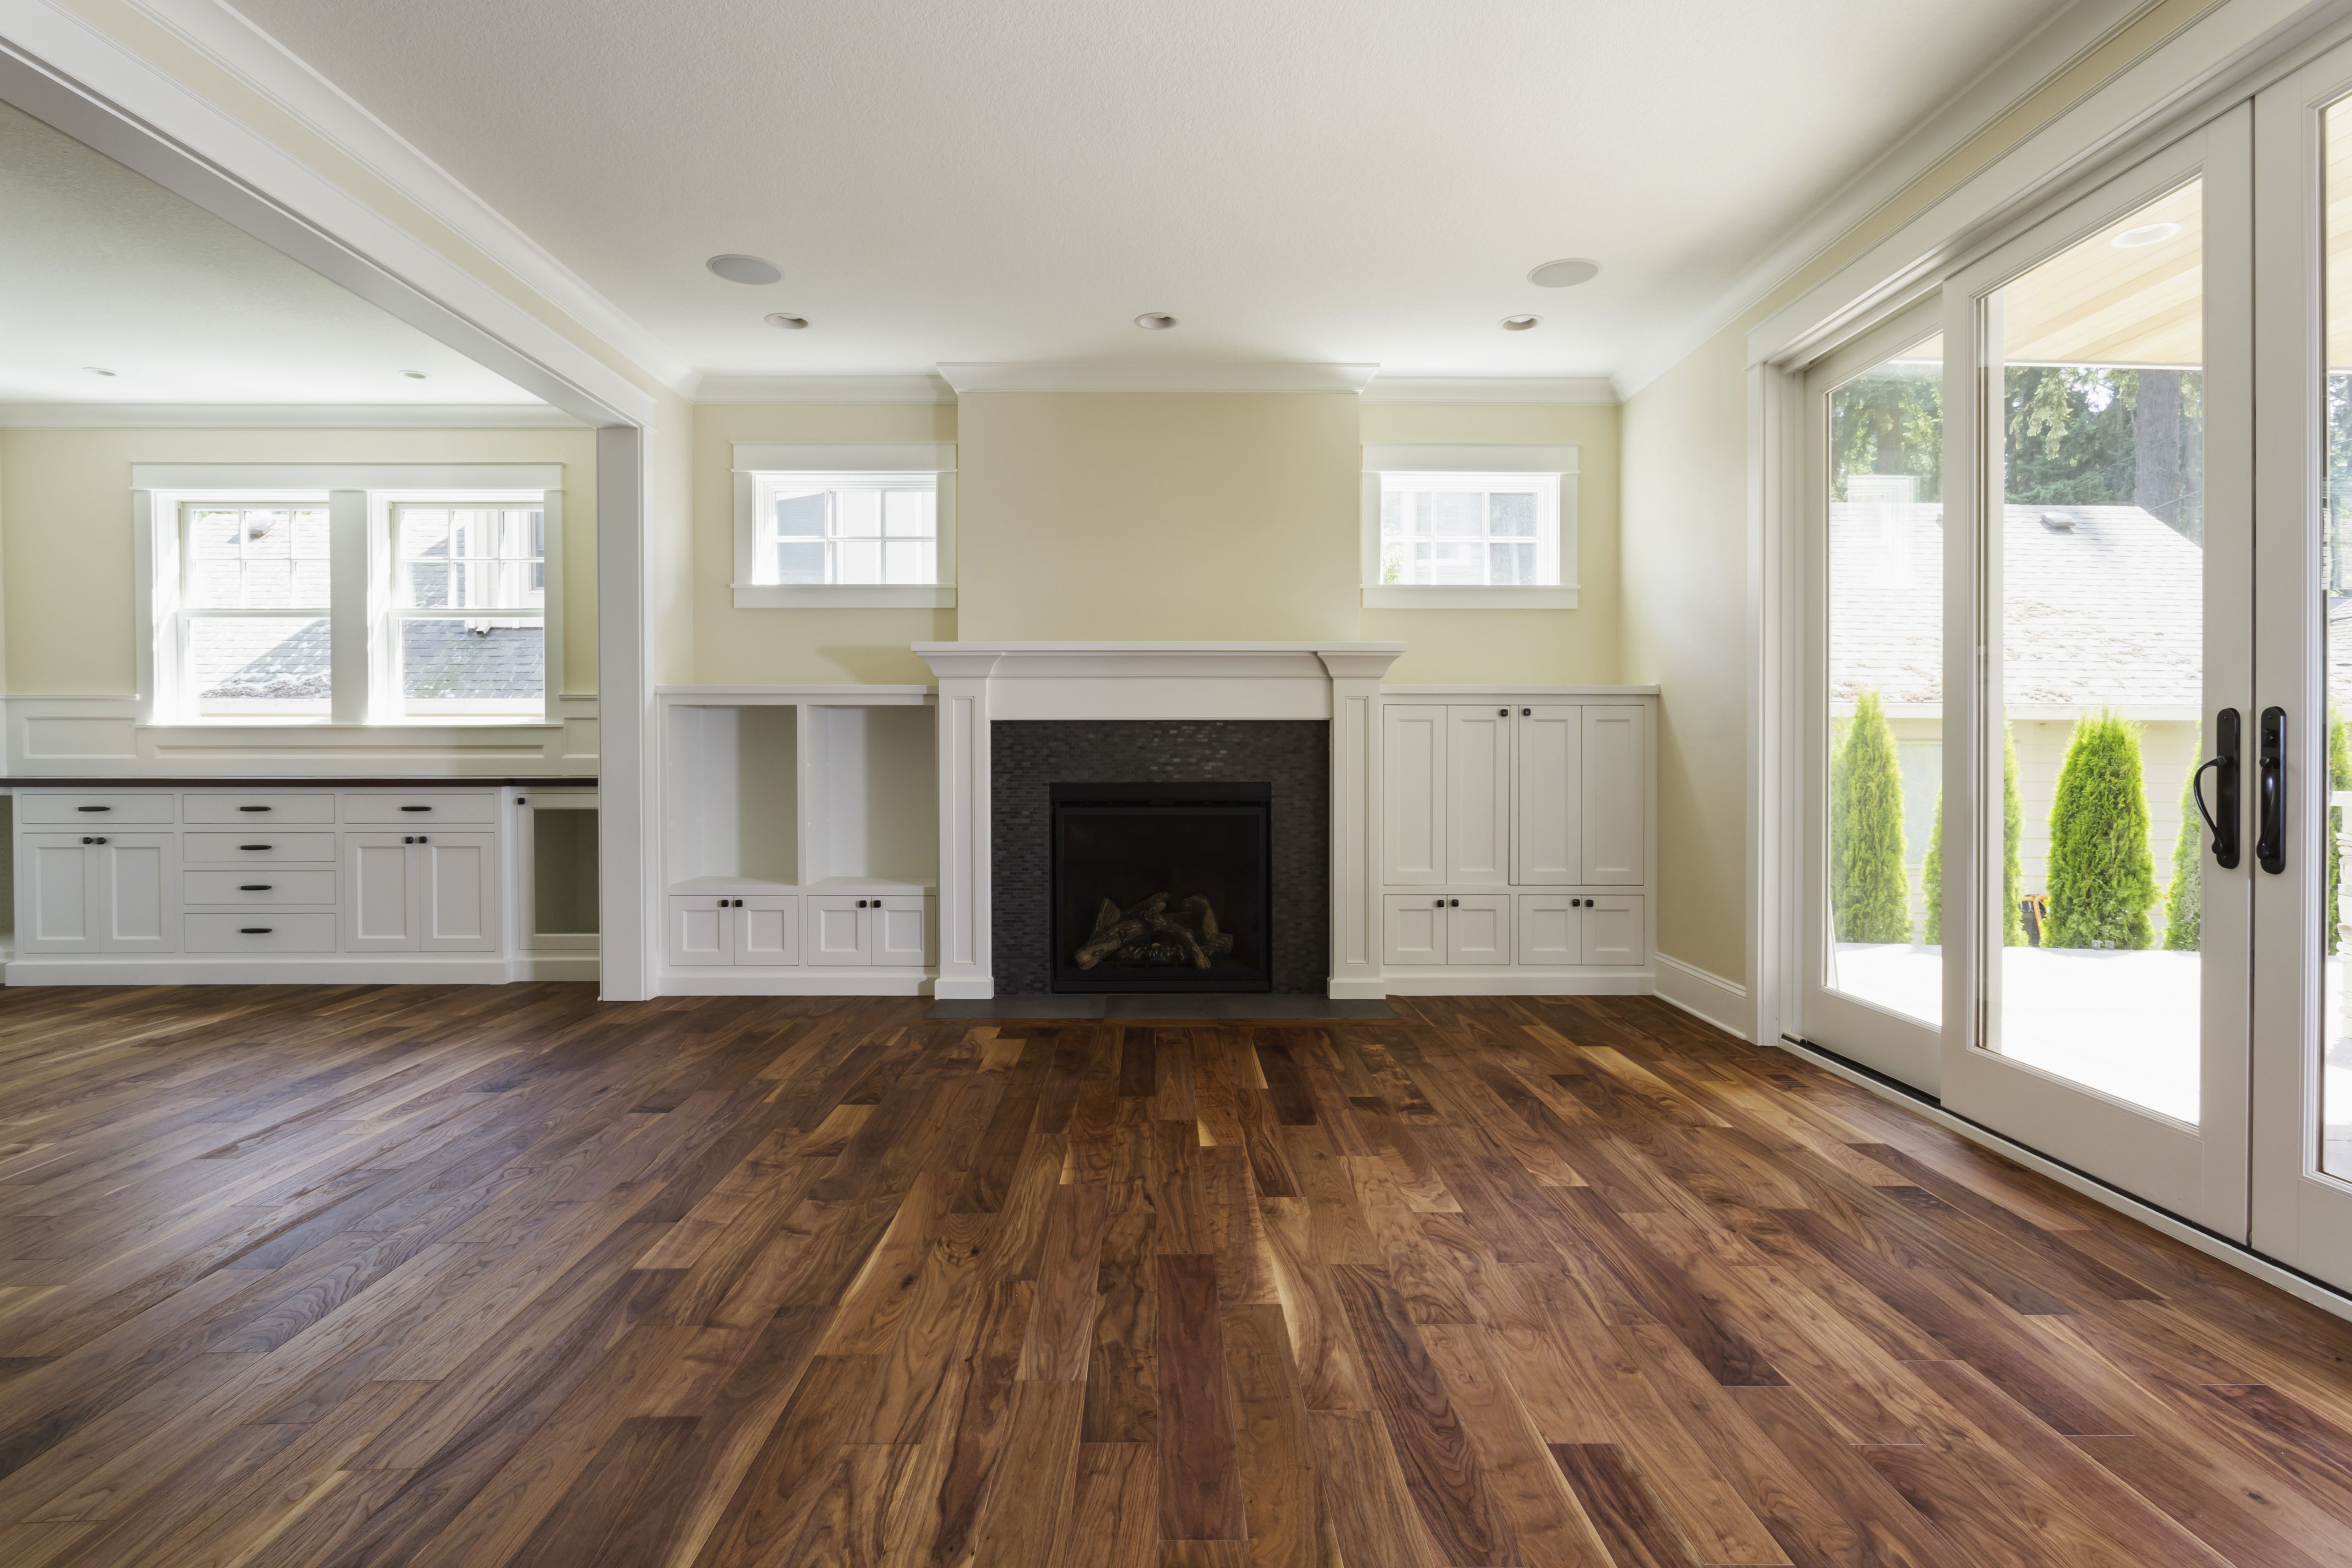 18 Lovable Average Cost to Get Hardwood Floors Installed 2024 free download average cost to get hardwood floors installed of the pros and cons of prefinished hardwood flooring for fireplace and built in shelves in living room 482143011 57bef8e33df78cc16e035397